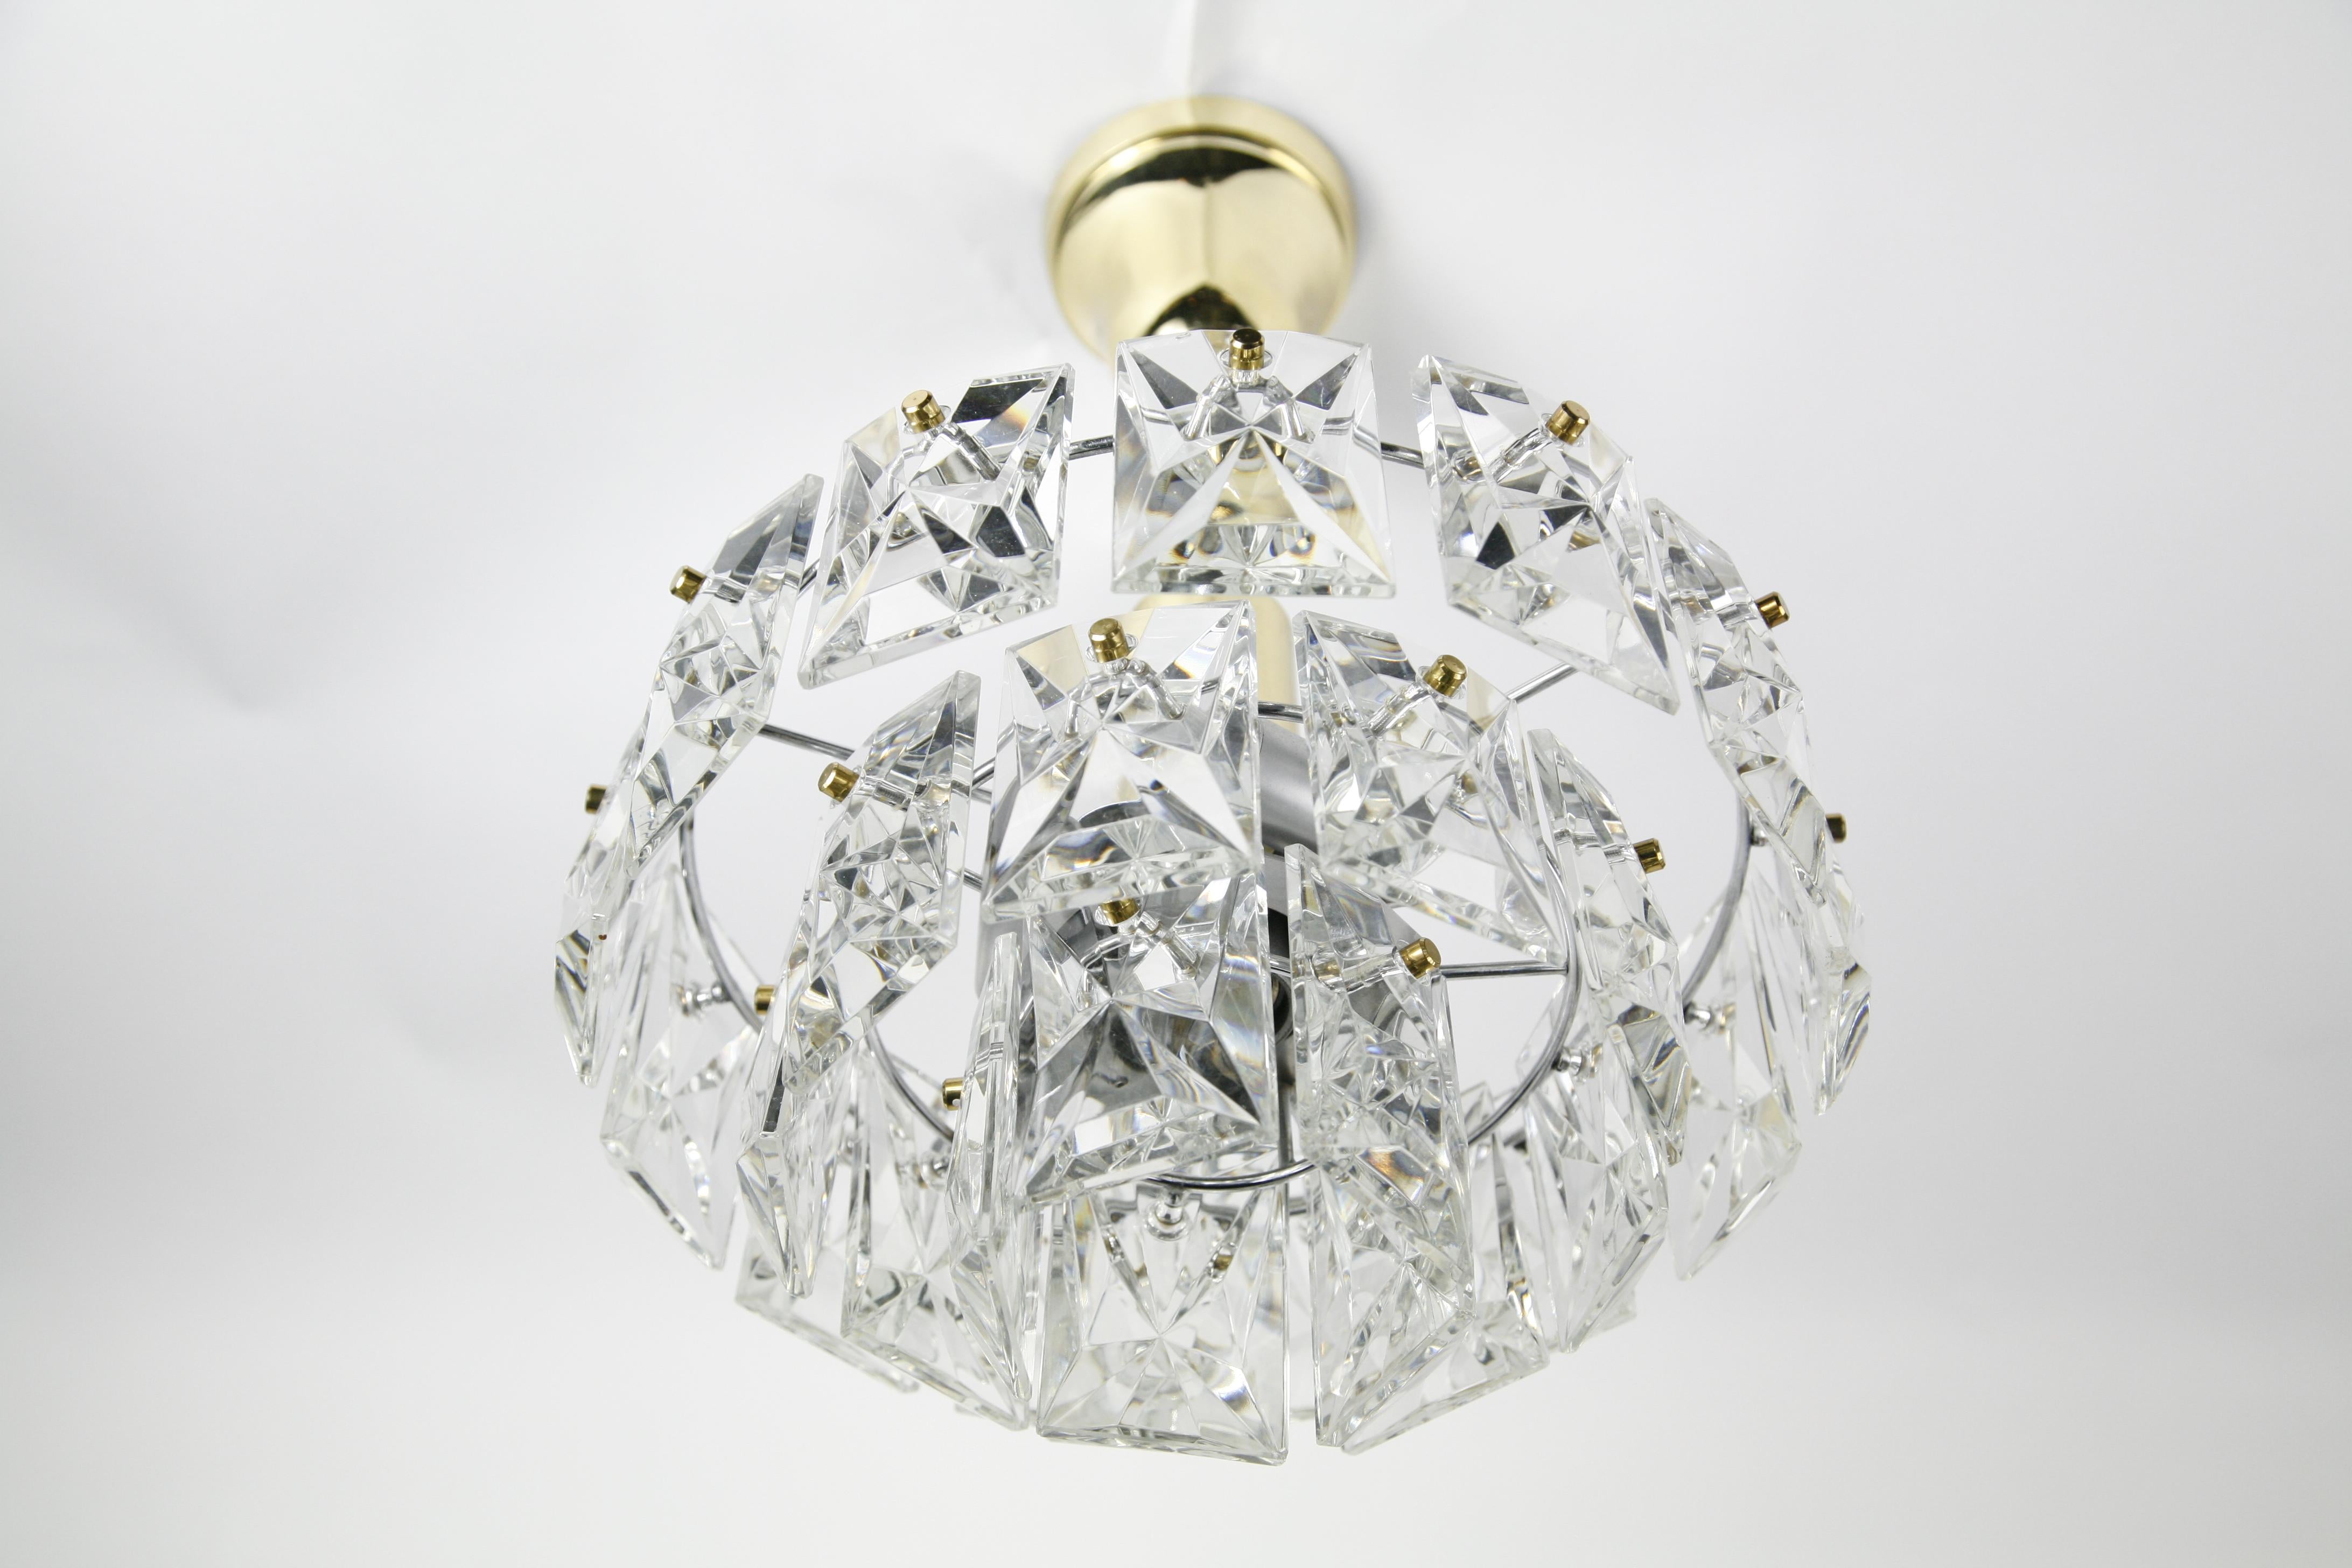 Crystal Kinkeldey Chandelier Chrome and Brass Frame, Germany, 1960, 3-tier diamond cut crystals it has one downward light and 3 sideward lights that illuminates the crystals, finials are in brass as well as the canopy and stem.


 